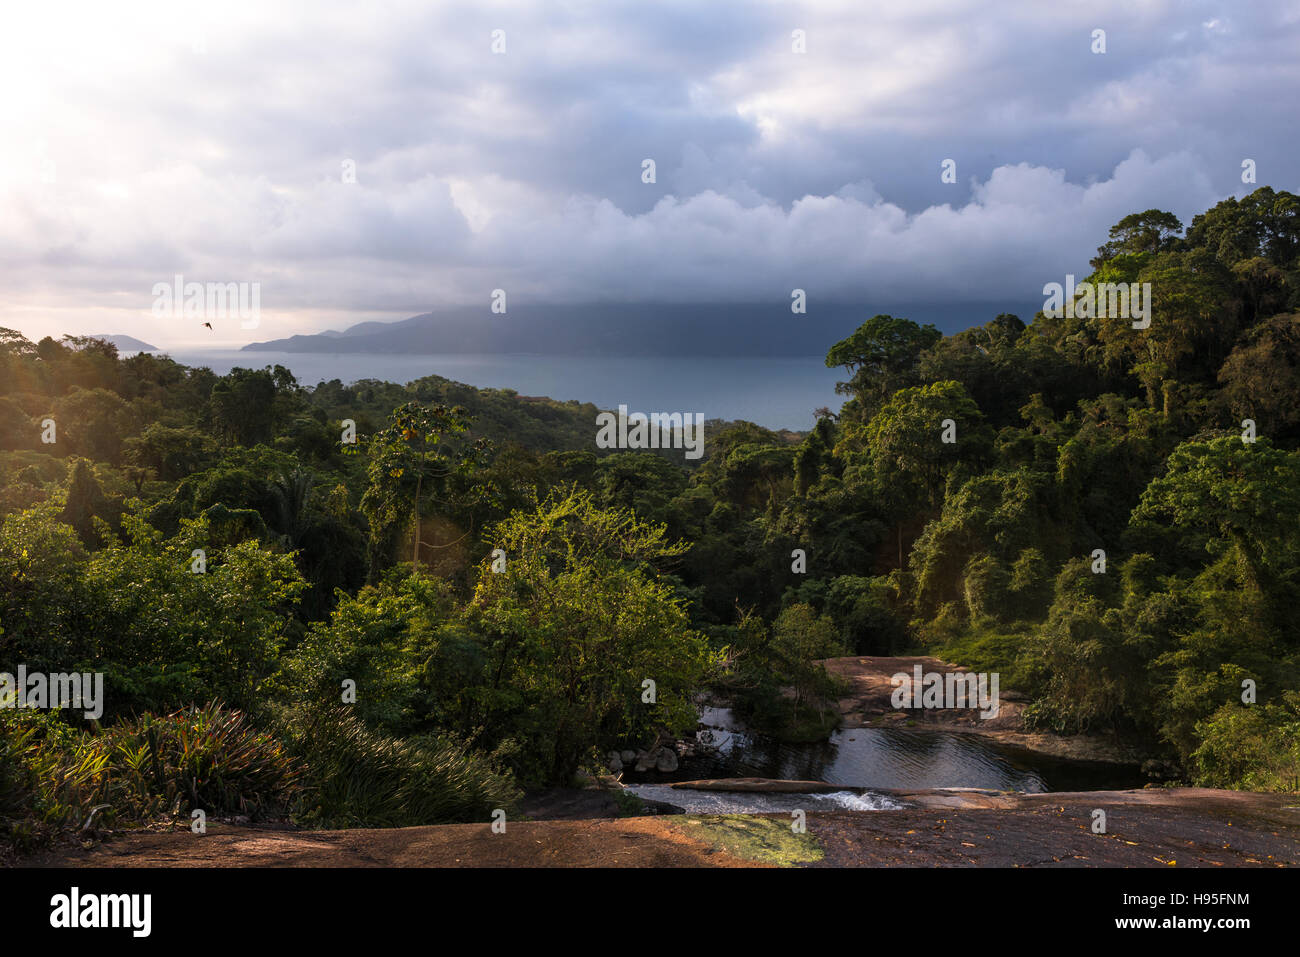 A view from the rainforest of the island of Ilhabela Stock Photo